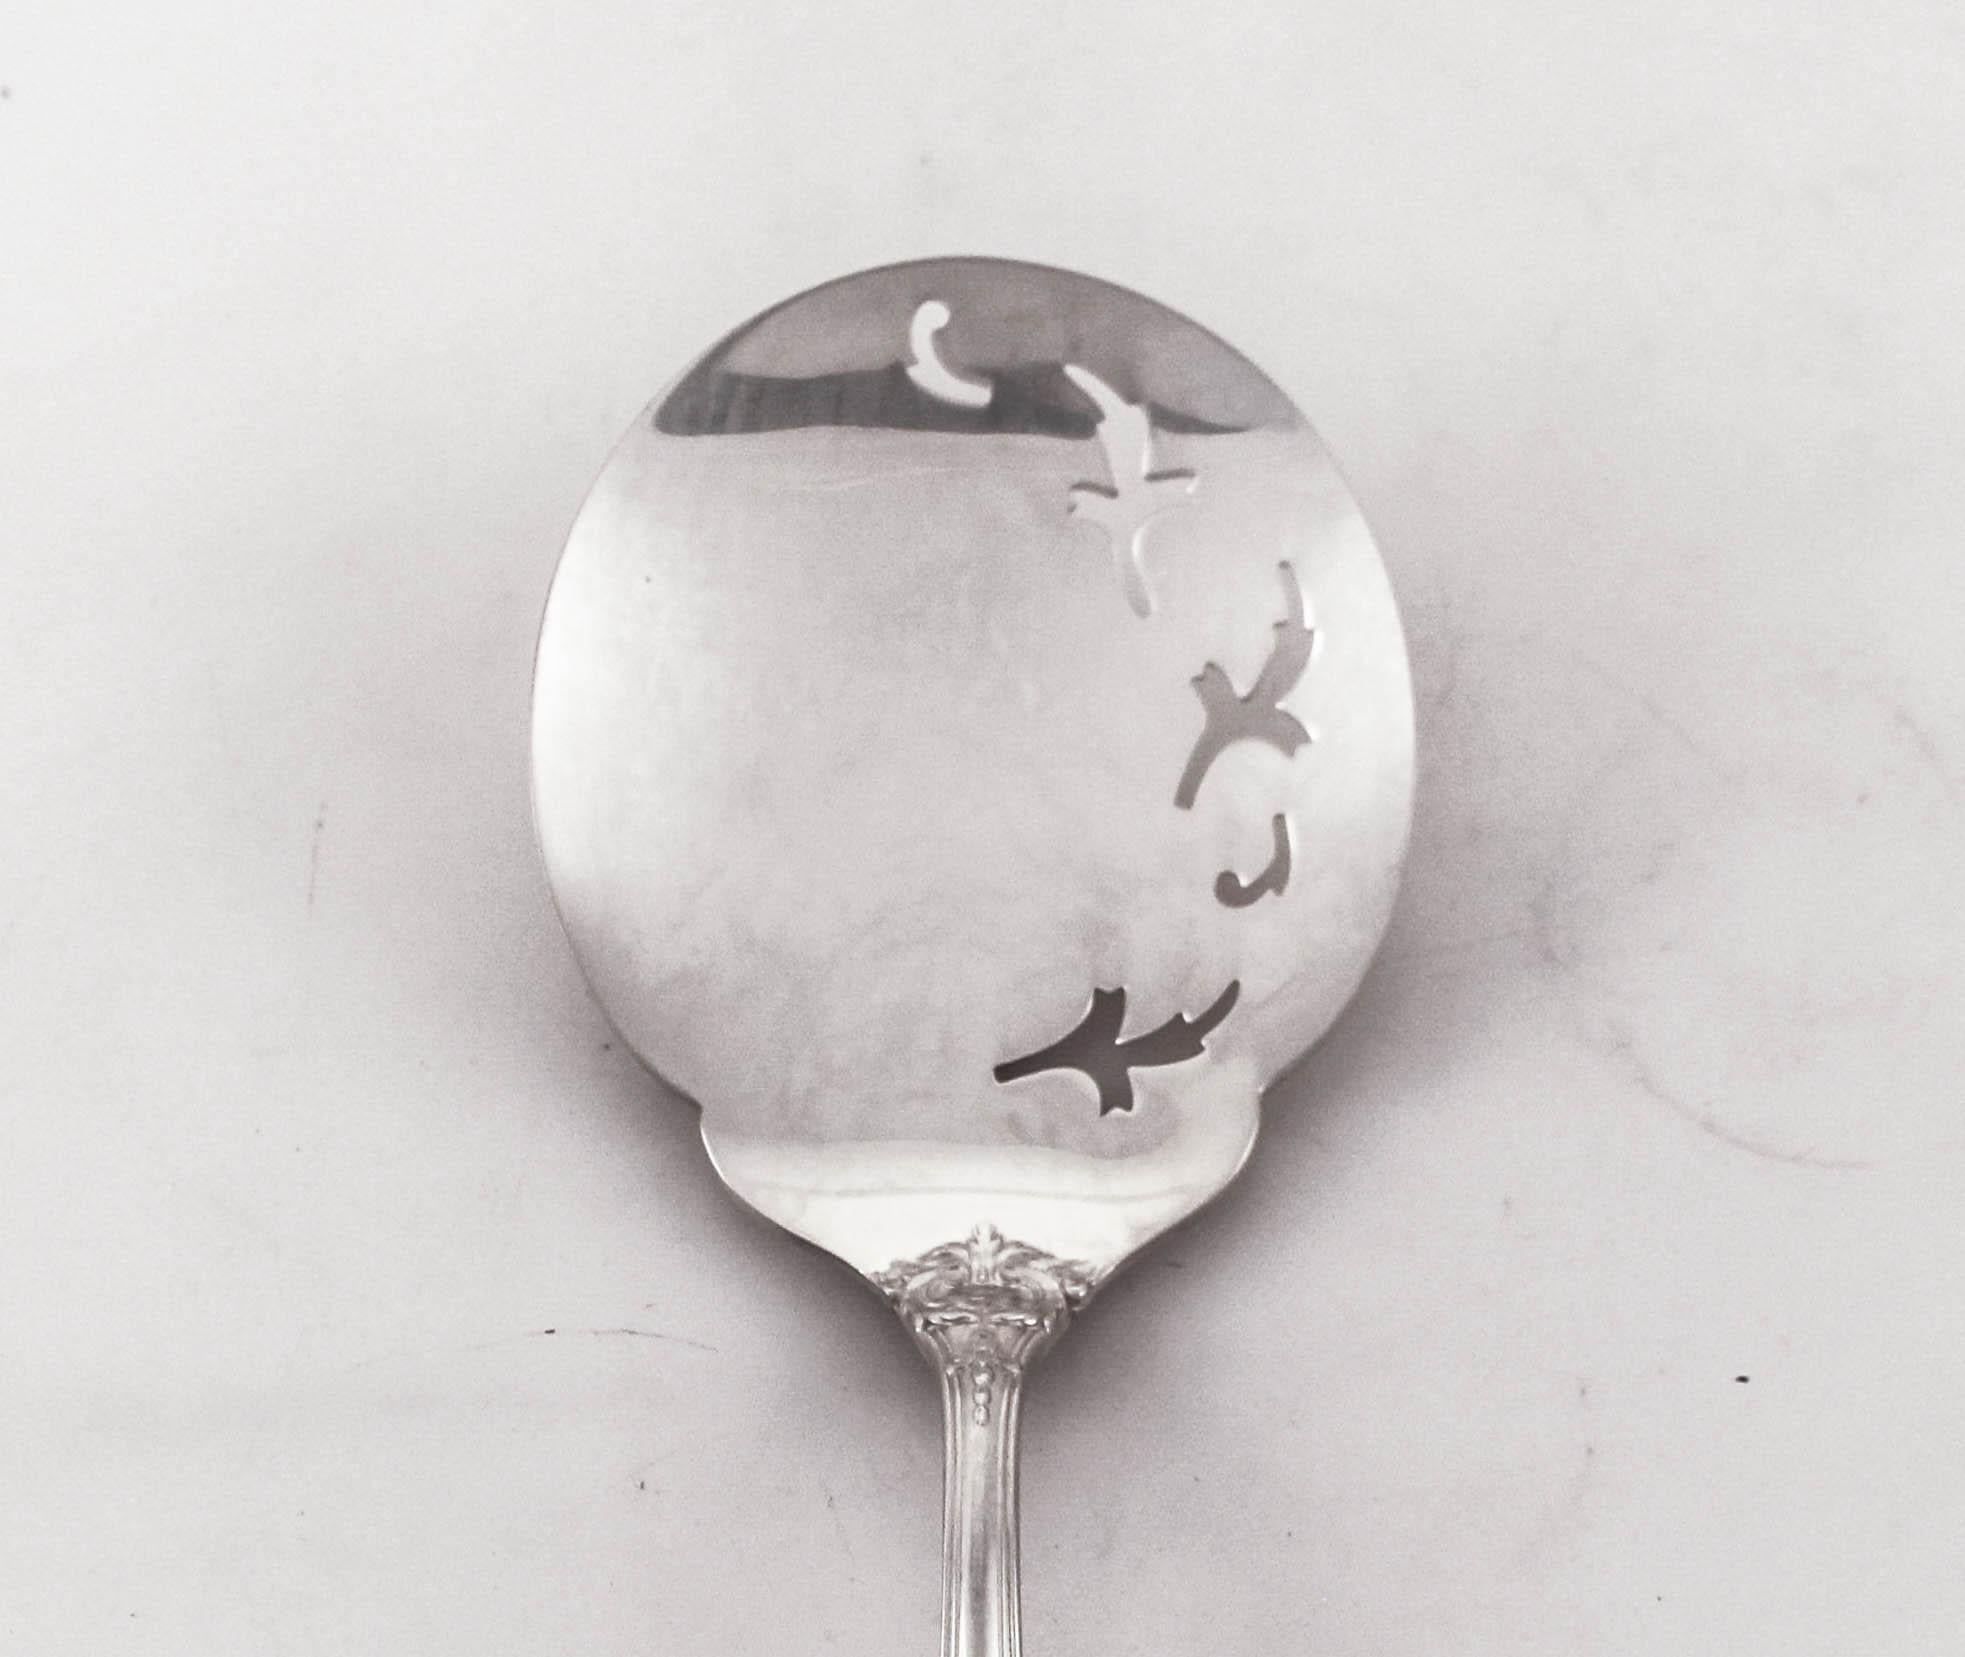 We are offering this sterling silver tomato server in the Francis I pattern by Reed and Barton. Francis I is R&B’s most famous pattern; it has always been a favorite among silver collectors.
This piece has the iconic pattern on the handle and the